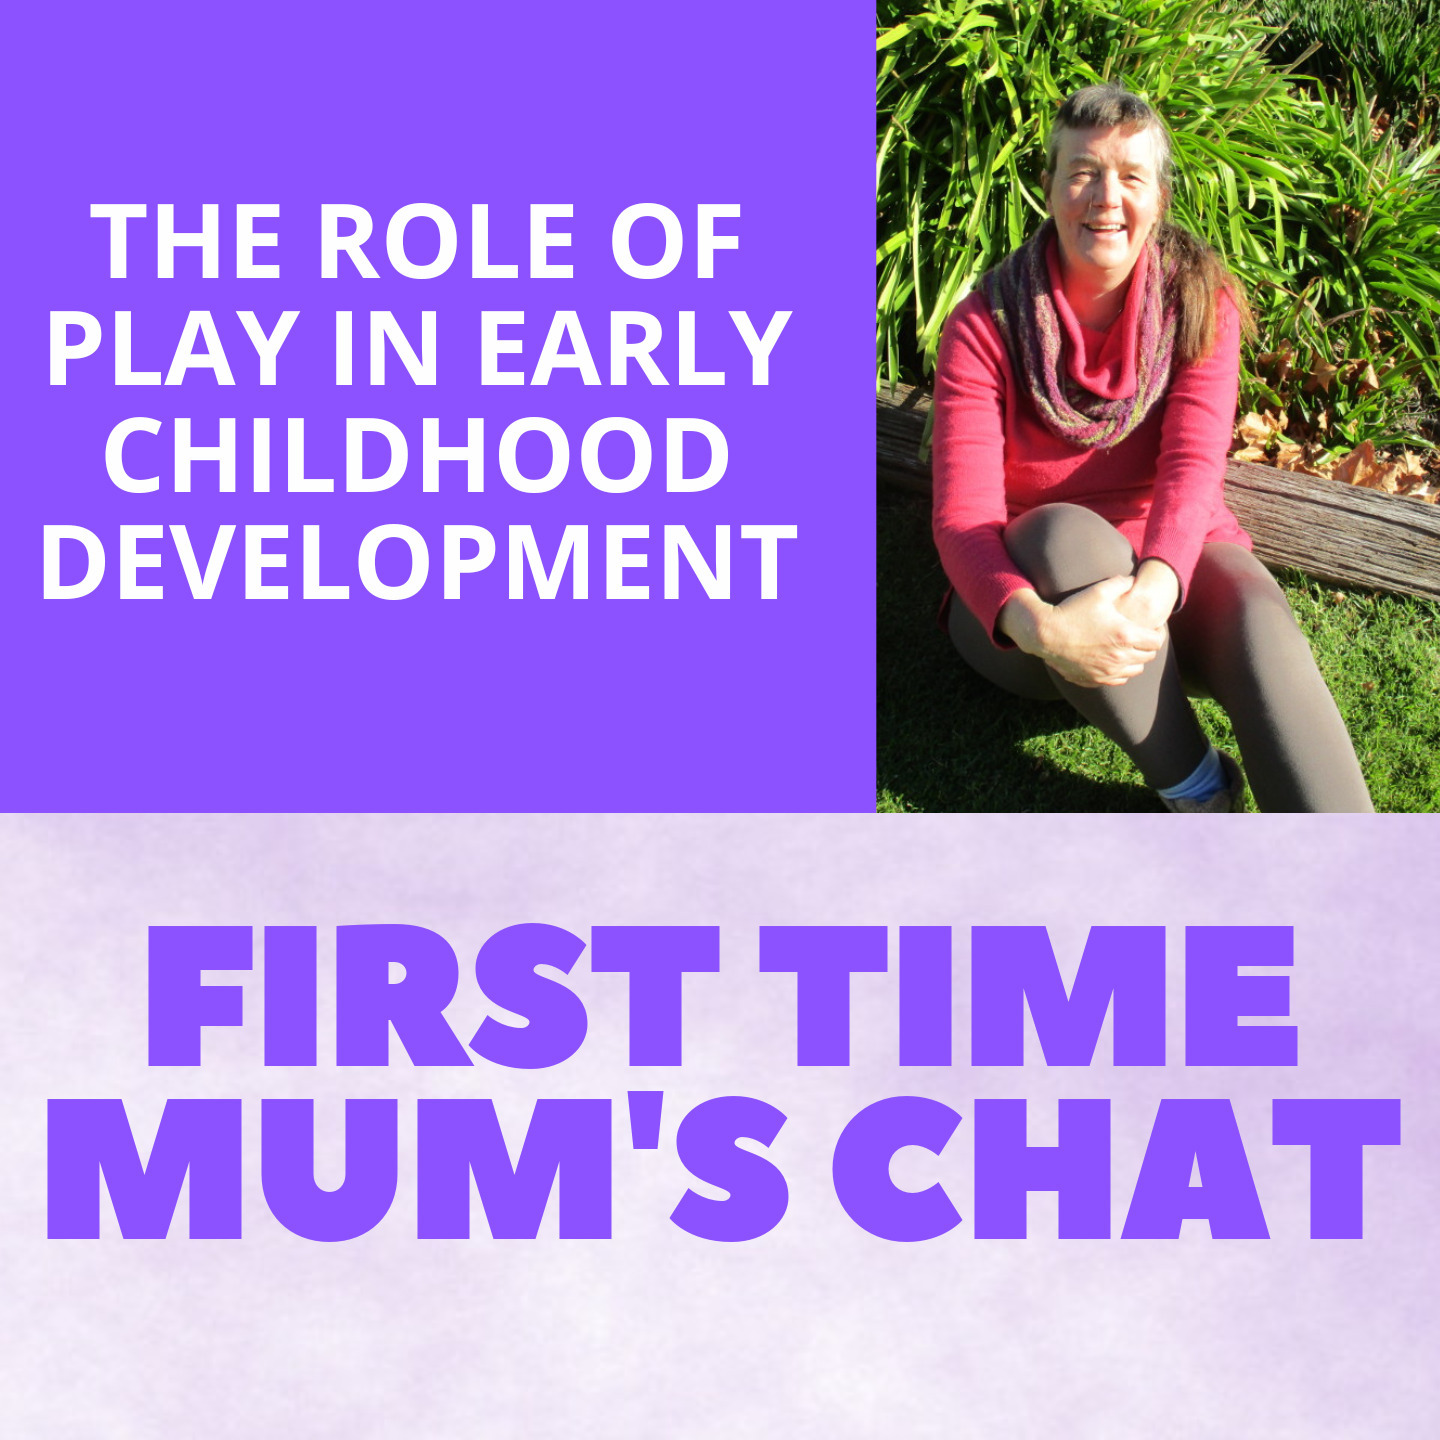 The Role of Play in Early Childhood Development